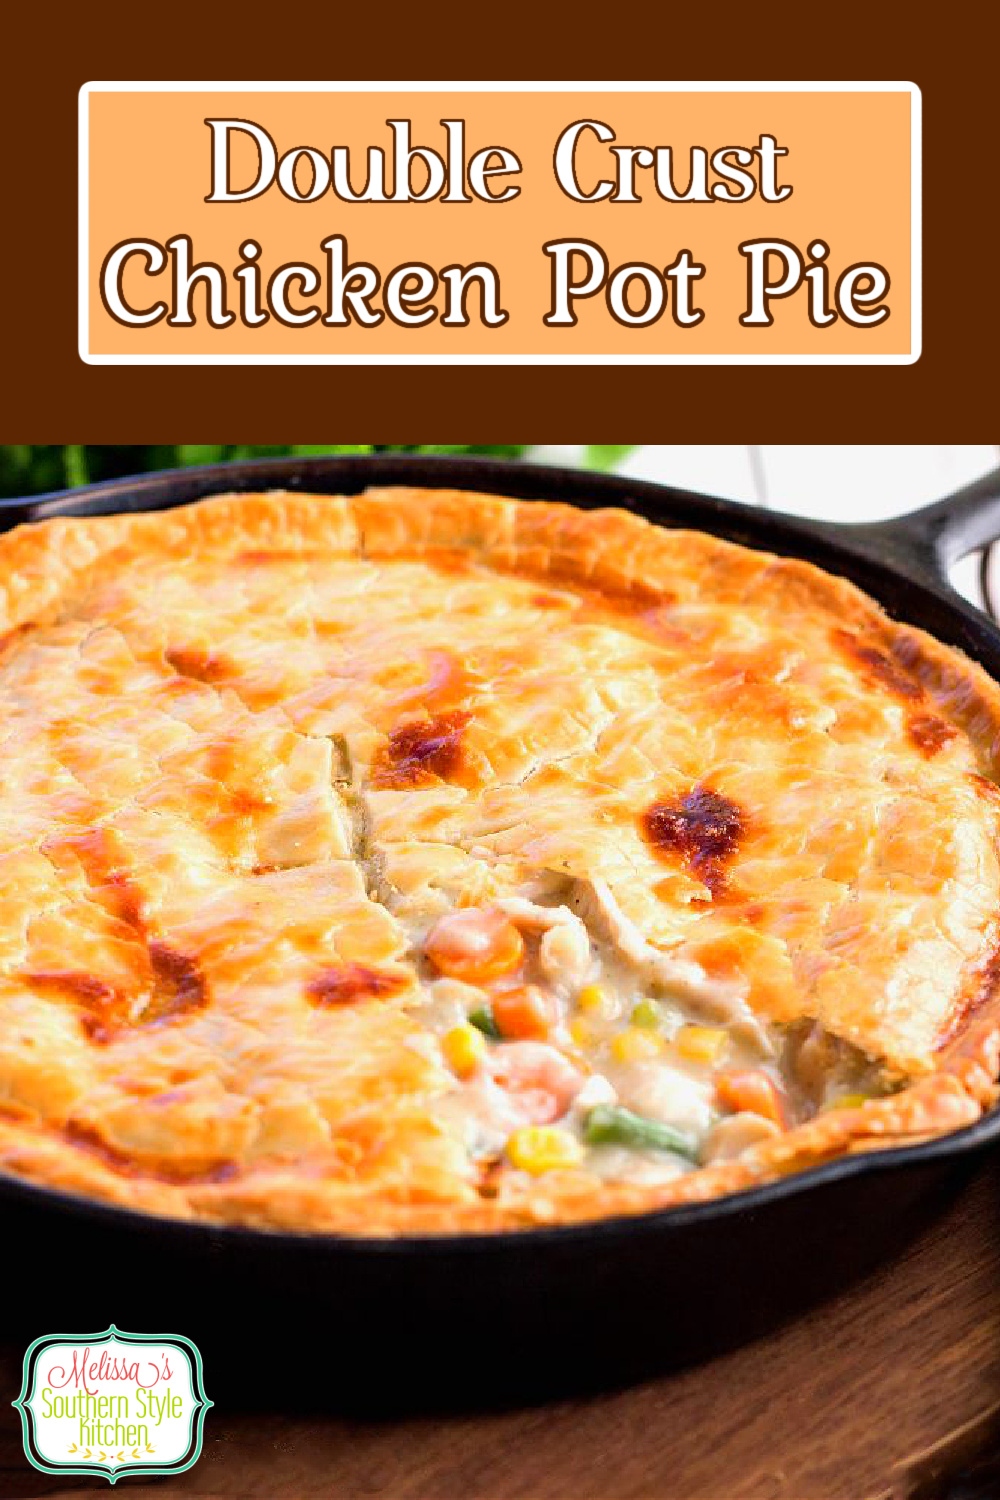 Serve restaurant quality at your own kitchen table with this insanely delicious Double Crust Chicken Pot Pie #chickenpotpie #doublecrustchickenpotpie #chickenrecipes #potpie #easychickenrecipes #comfortfood #dinner #dinnerideas #chicken #southernfood #southernrecipes